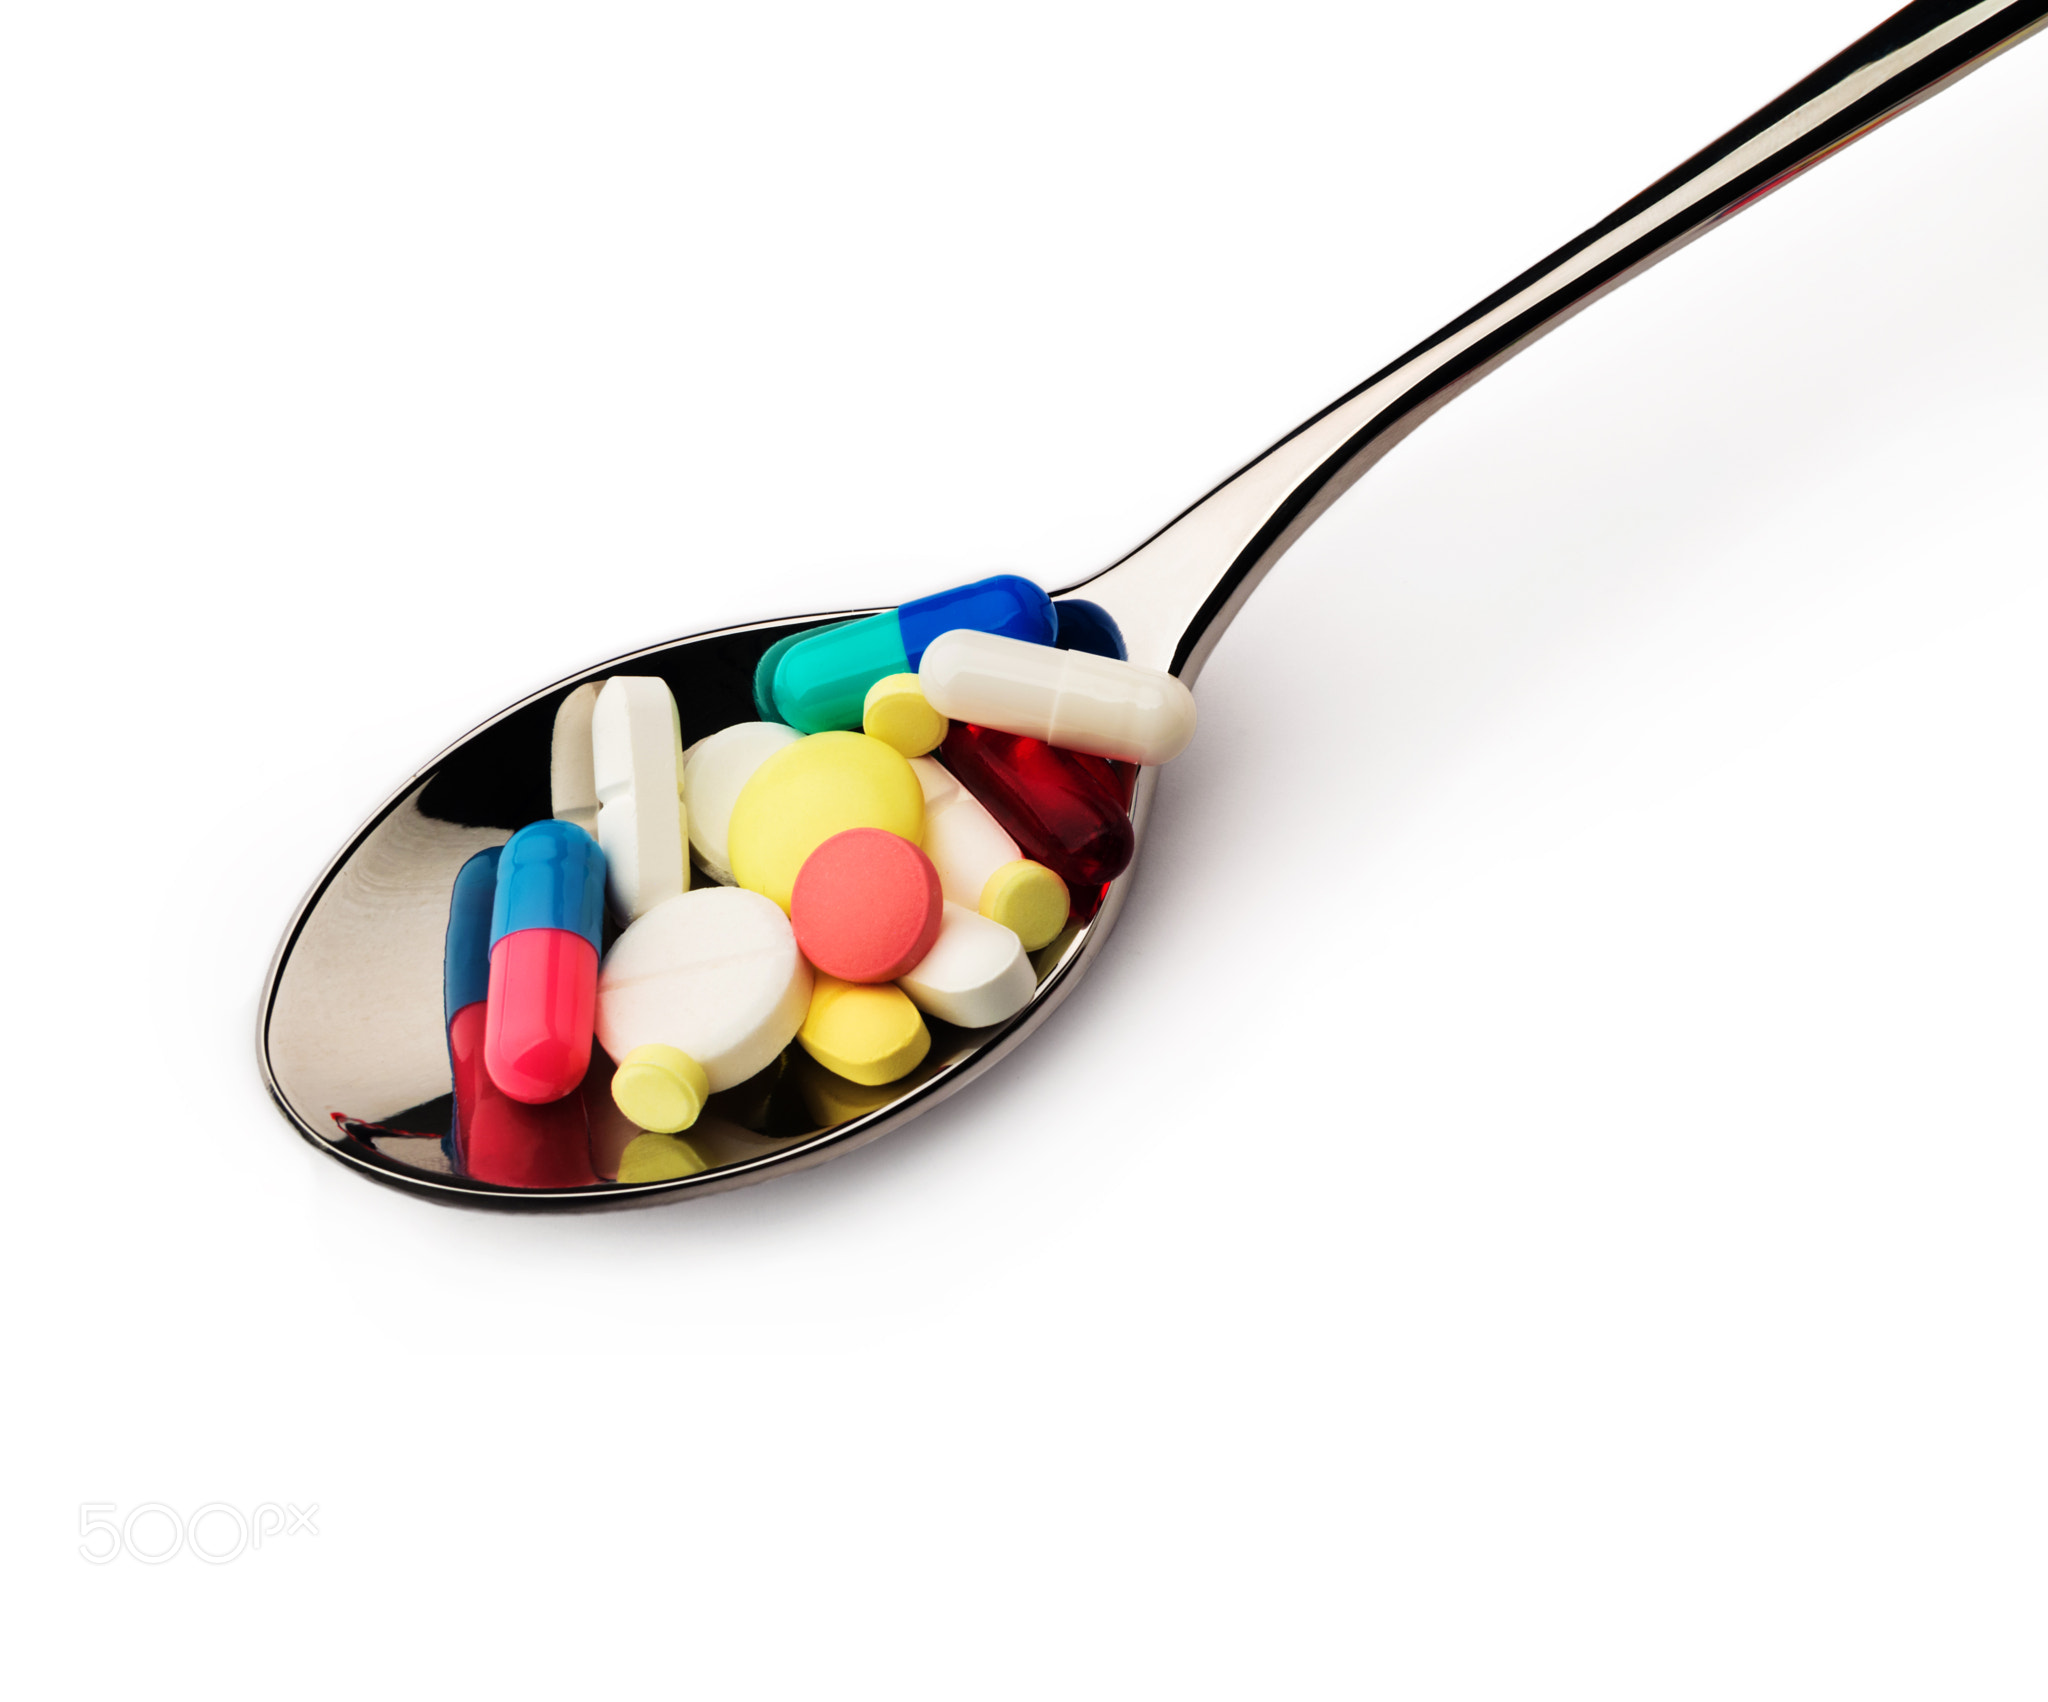 Disease. A lot of pills into spoon